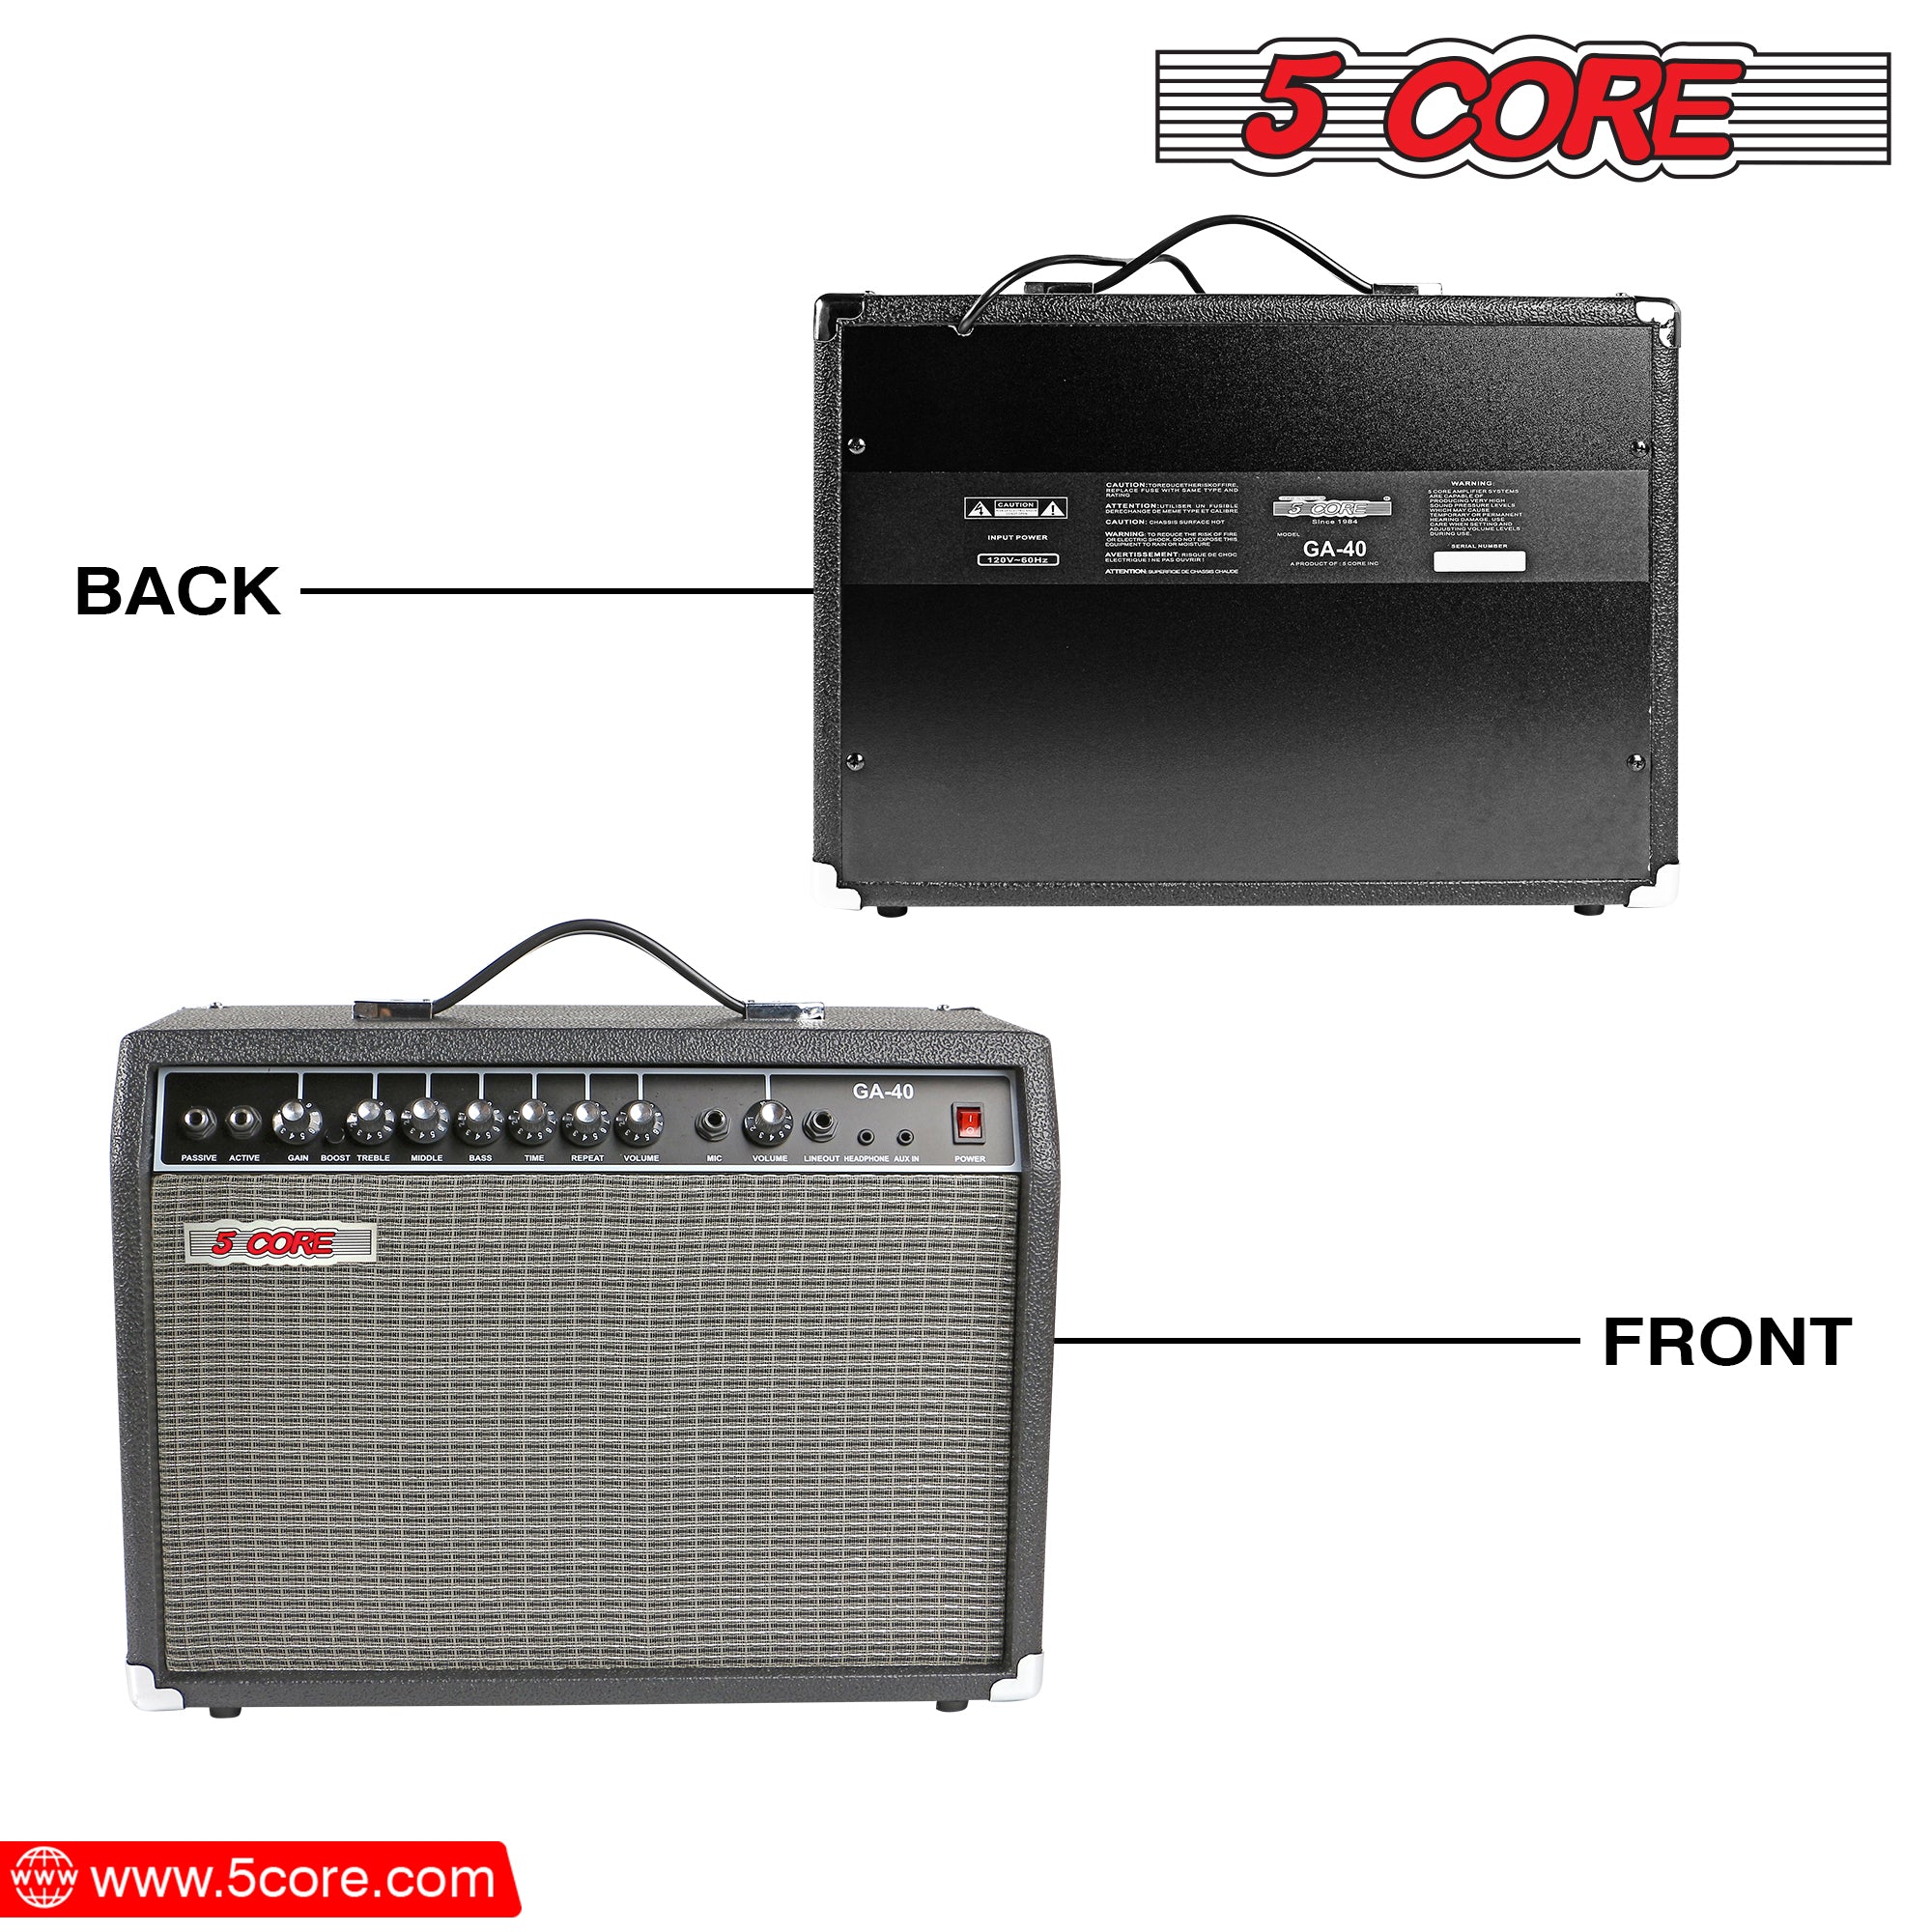 Compact and portable design ideal for live performances, gigs, and outdoor use.